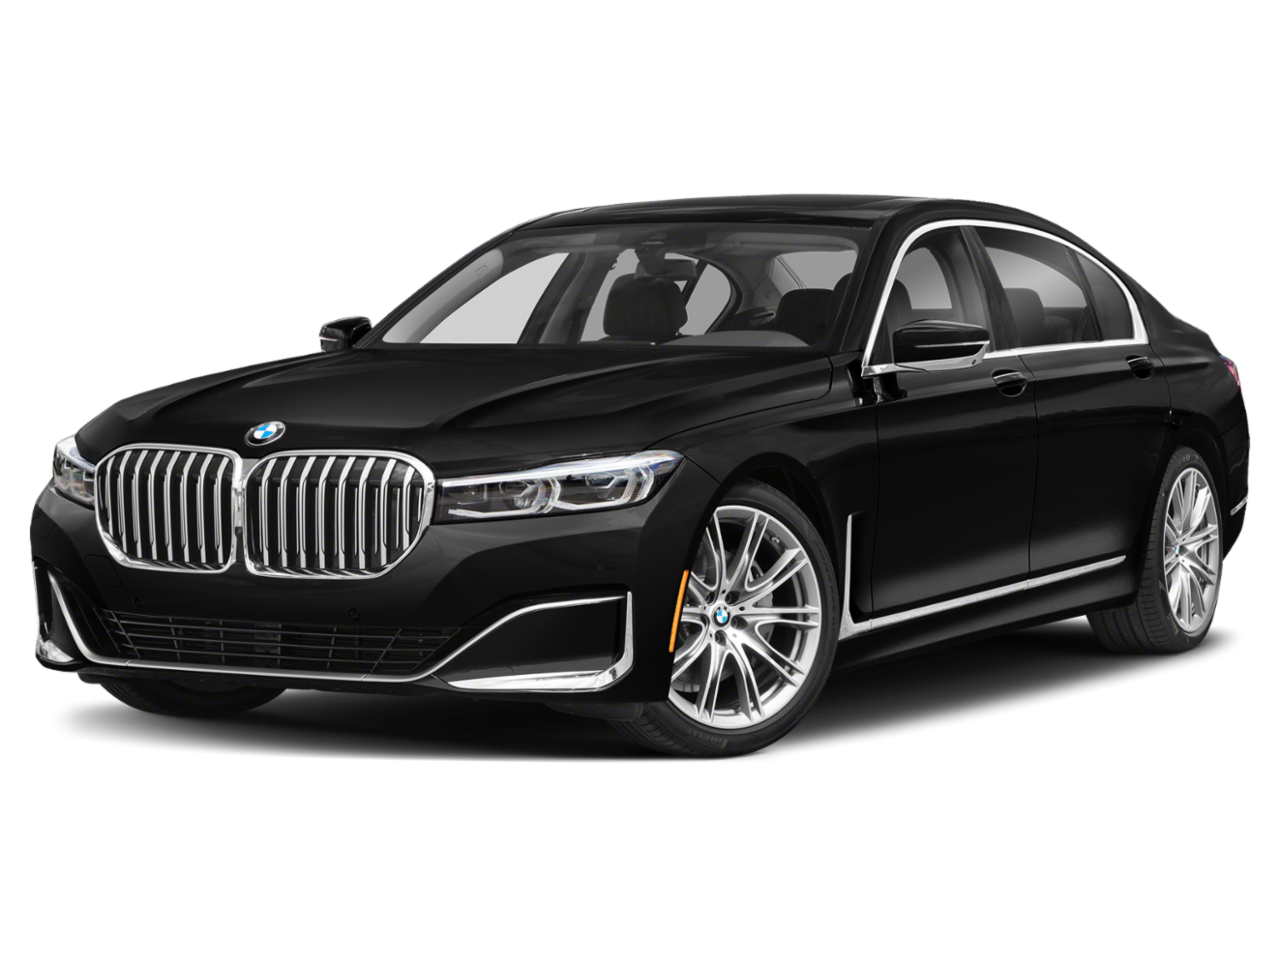 New BMW 740i xDrive from your Tampa, FL dealership, Ferman Automotive